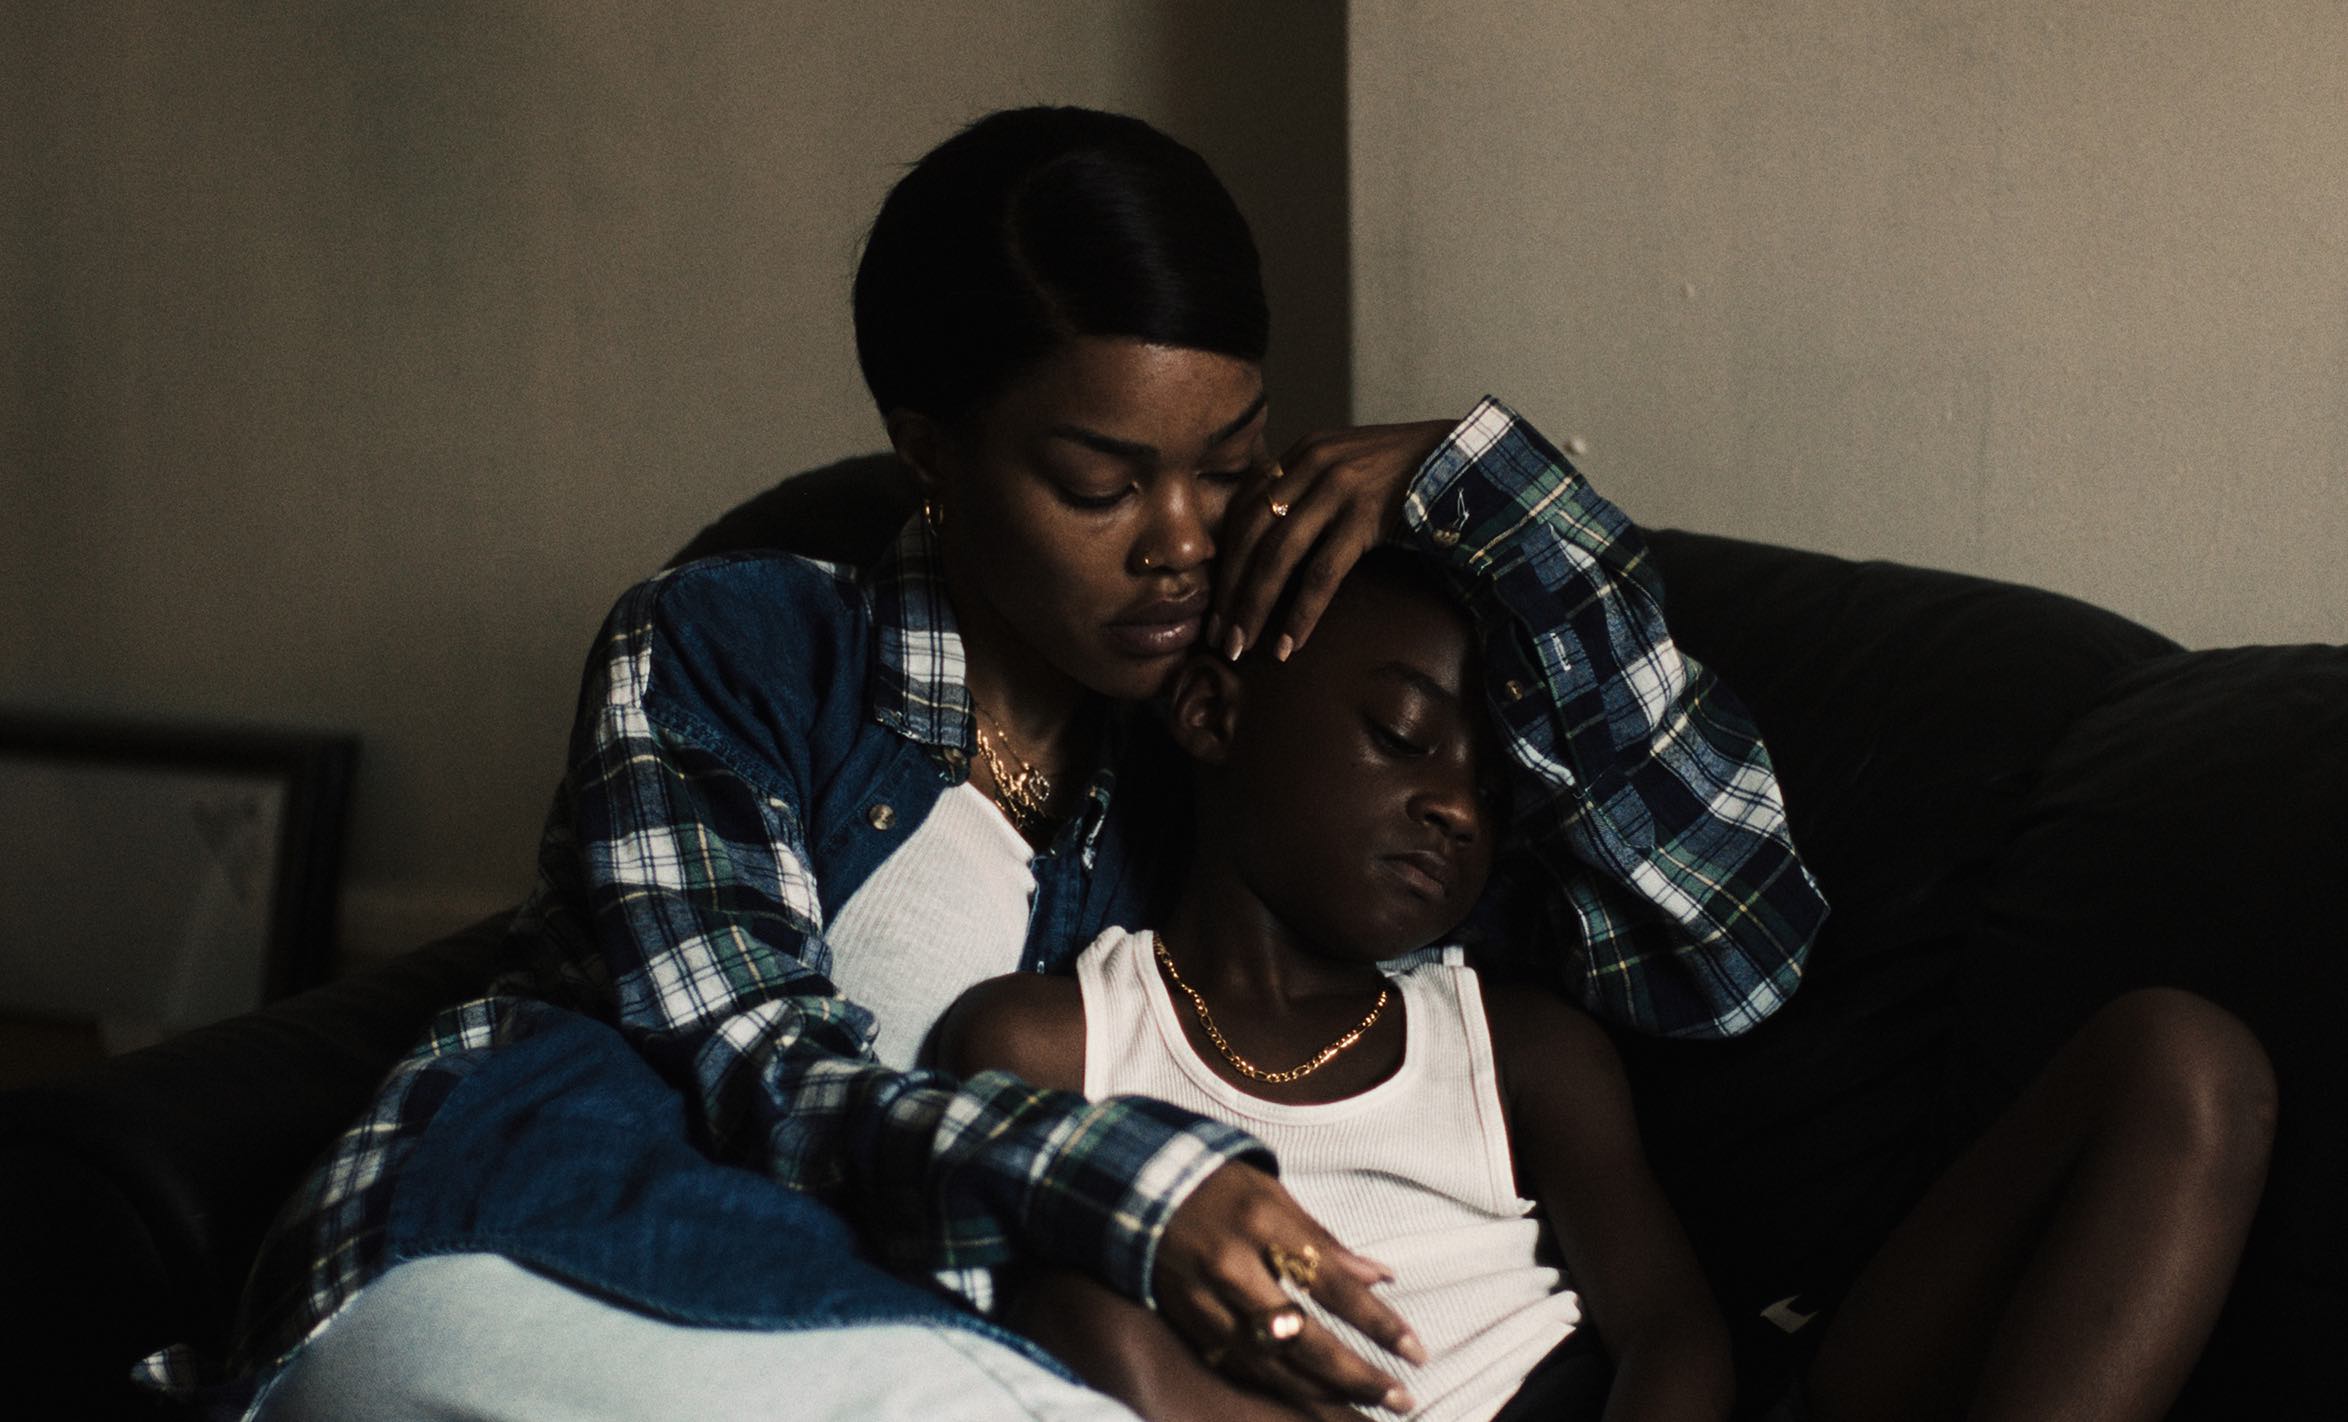 Teyona Taylor and Aaron Kingsley Adetola make a home against all odds in A Thousand and One / Photo by Focus Features, courtesy of Sundance Institute